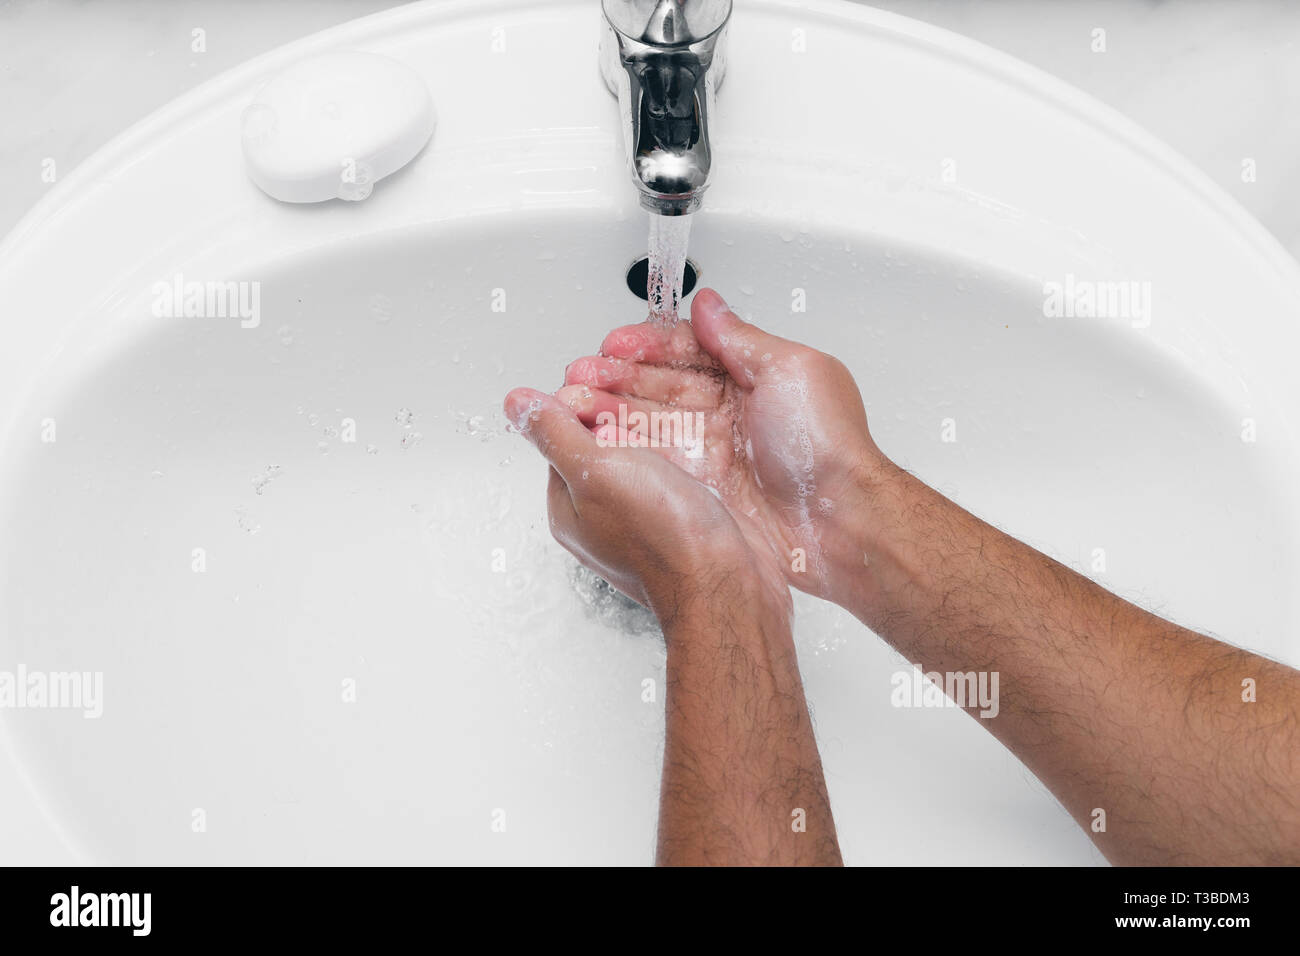 Adult caucasian male washing hands with soap under the faucet with water Stock Photo